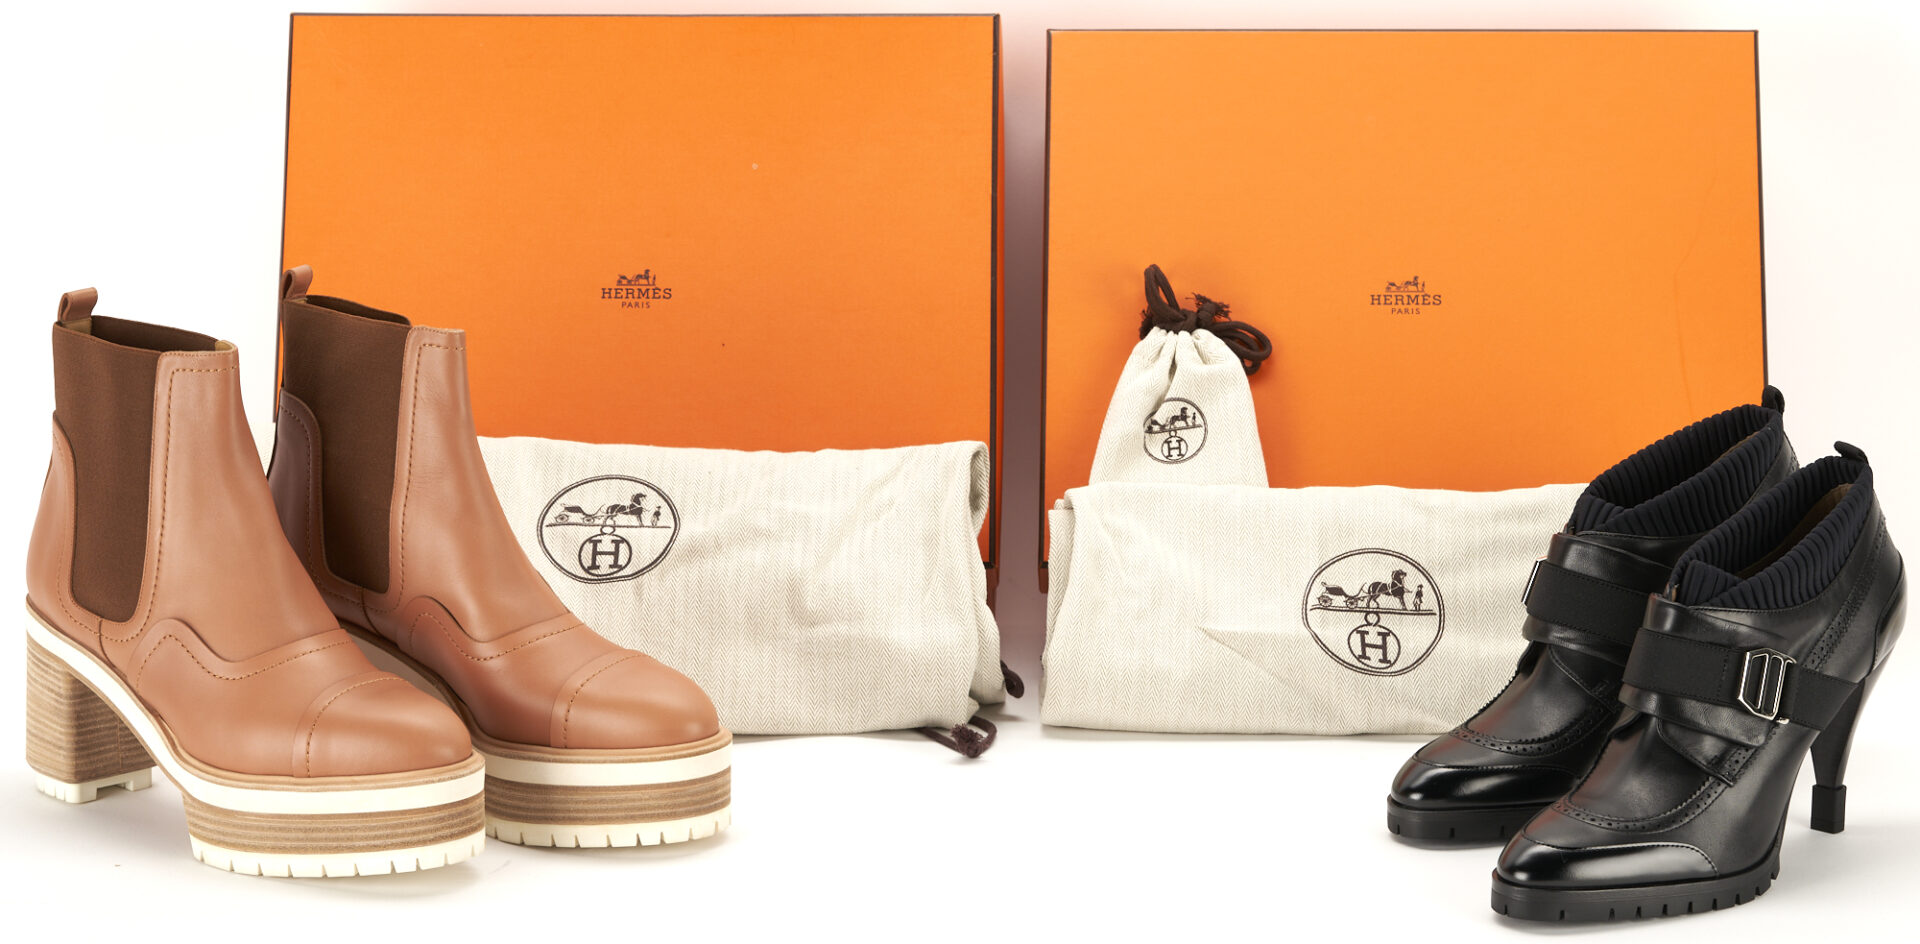 Lot 1170: 2 Pairs Hermes Calfskin Booties, incl. Punchy Ankle Boots